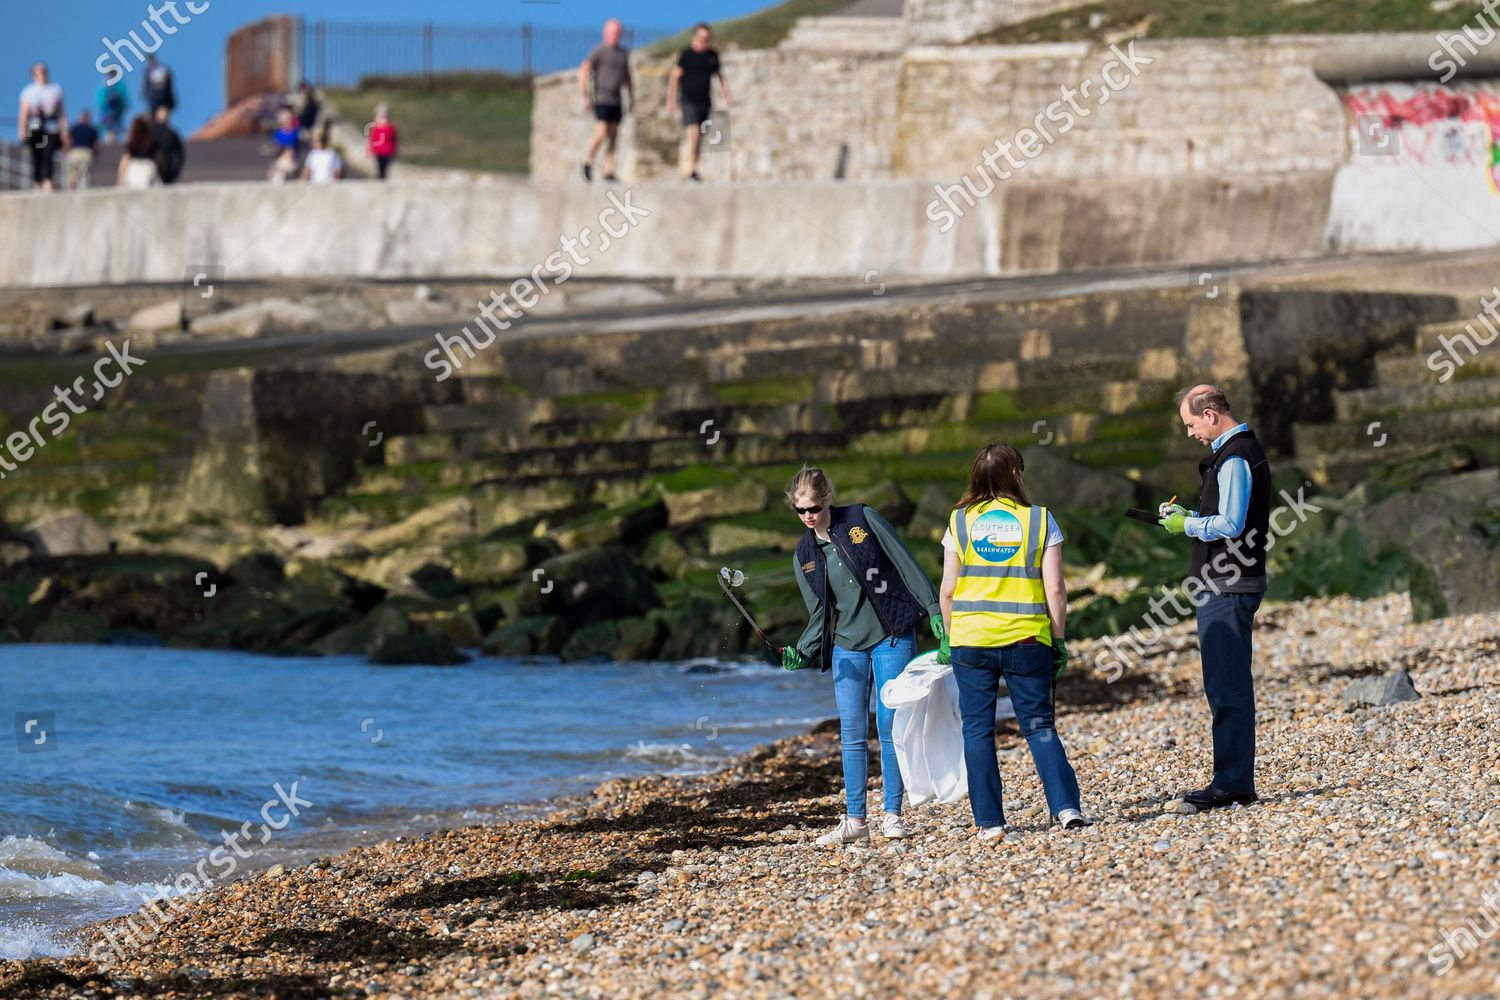 prince-edward-and-sophie-countess-of-wessex-great-british-beach-clean-southsea-beach-portsmouth-uk-shutterstock-editorial-10782998bs.jpg